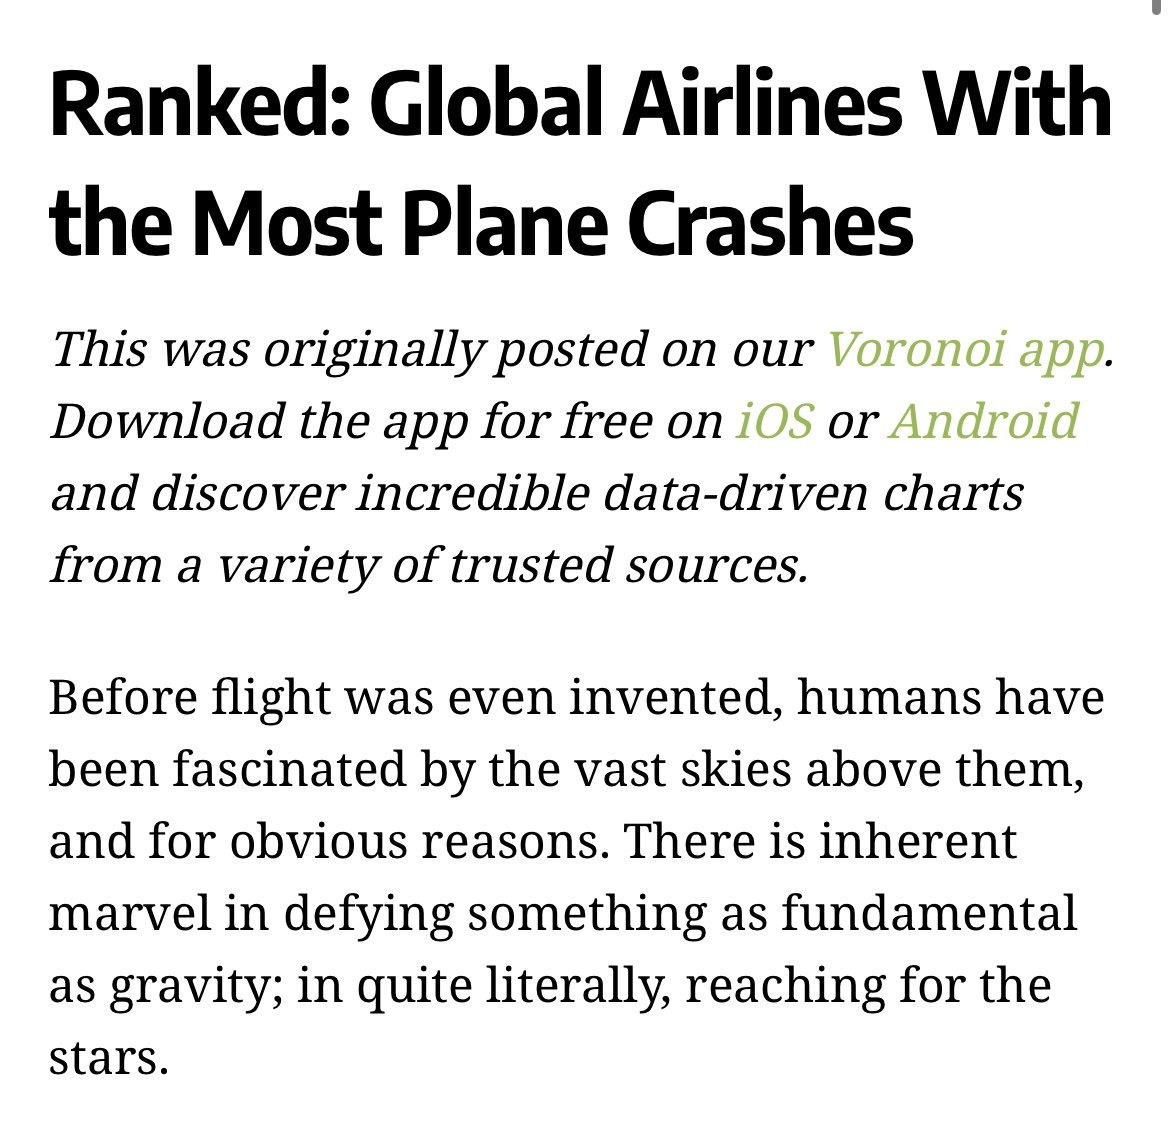 Imagine if plane crashes were also called plane “accidents”